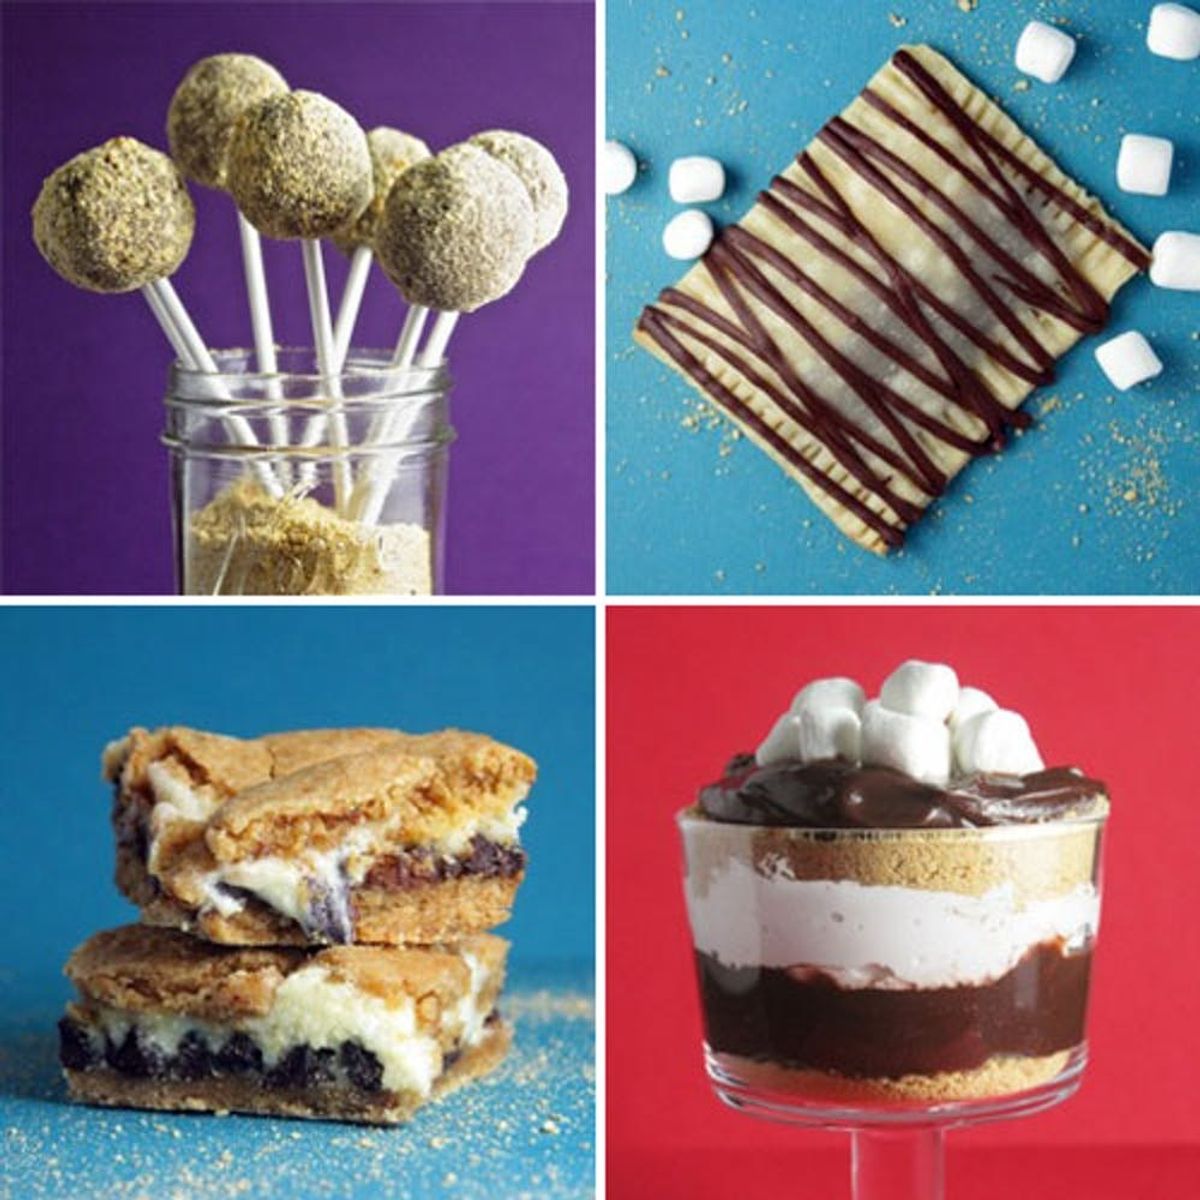 4 New Ways to Make S’mores, No Campfire Required